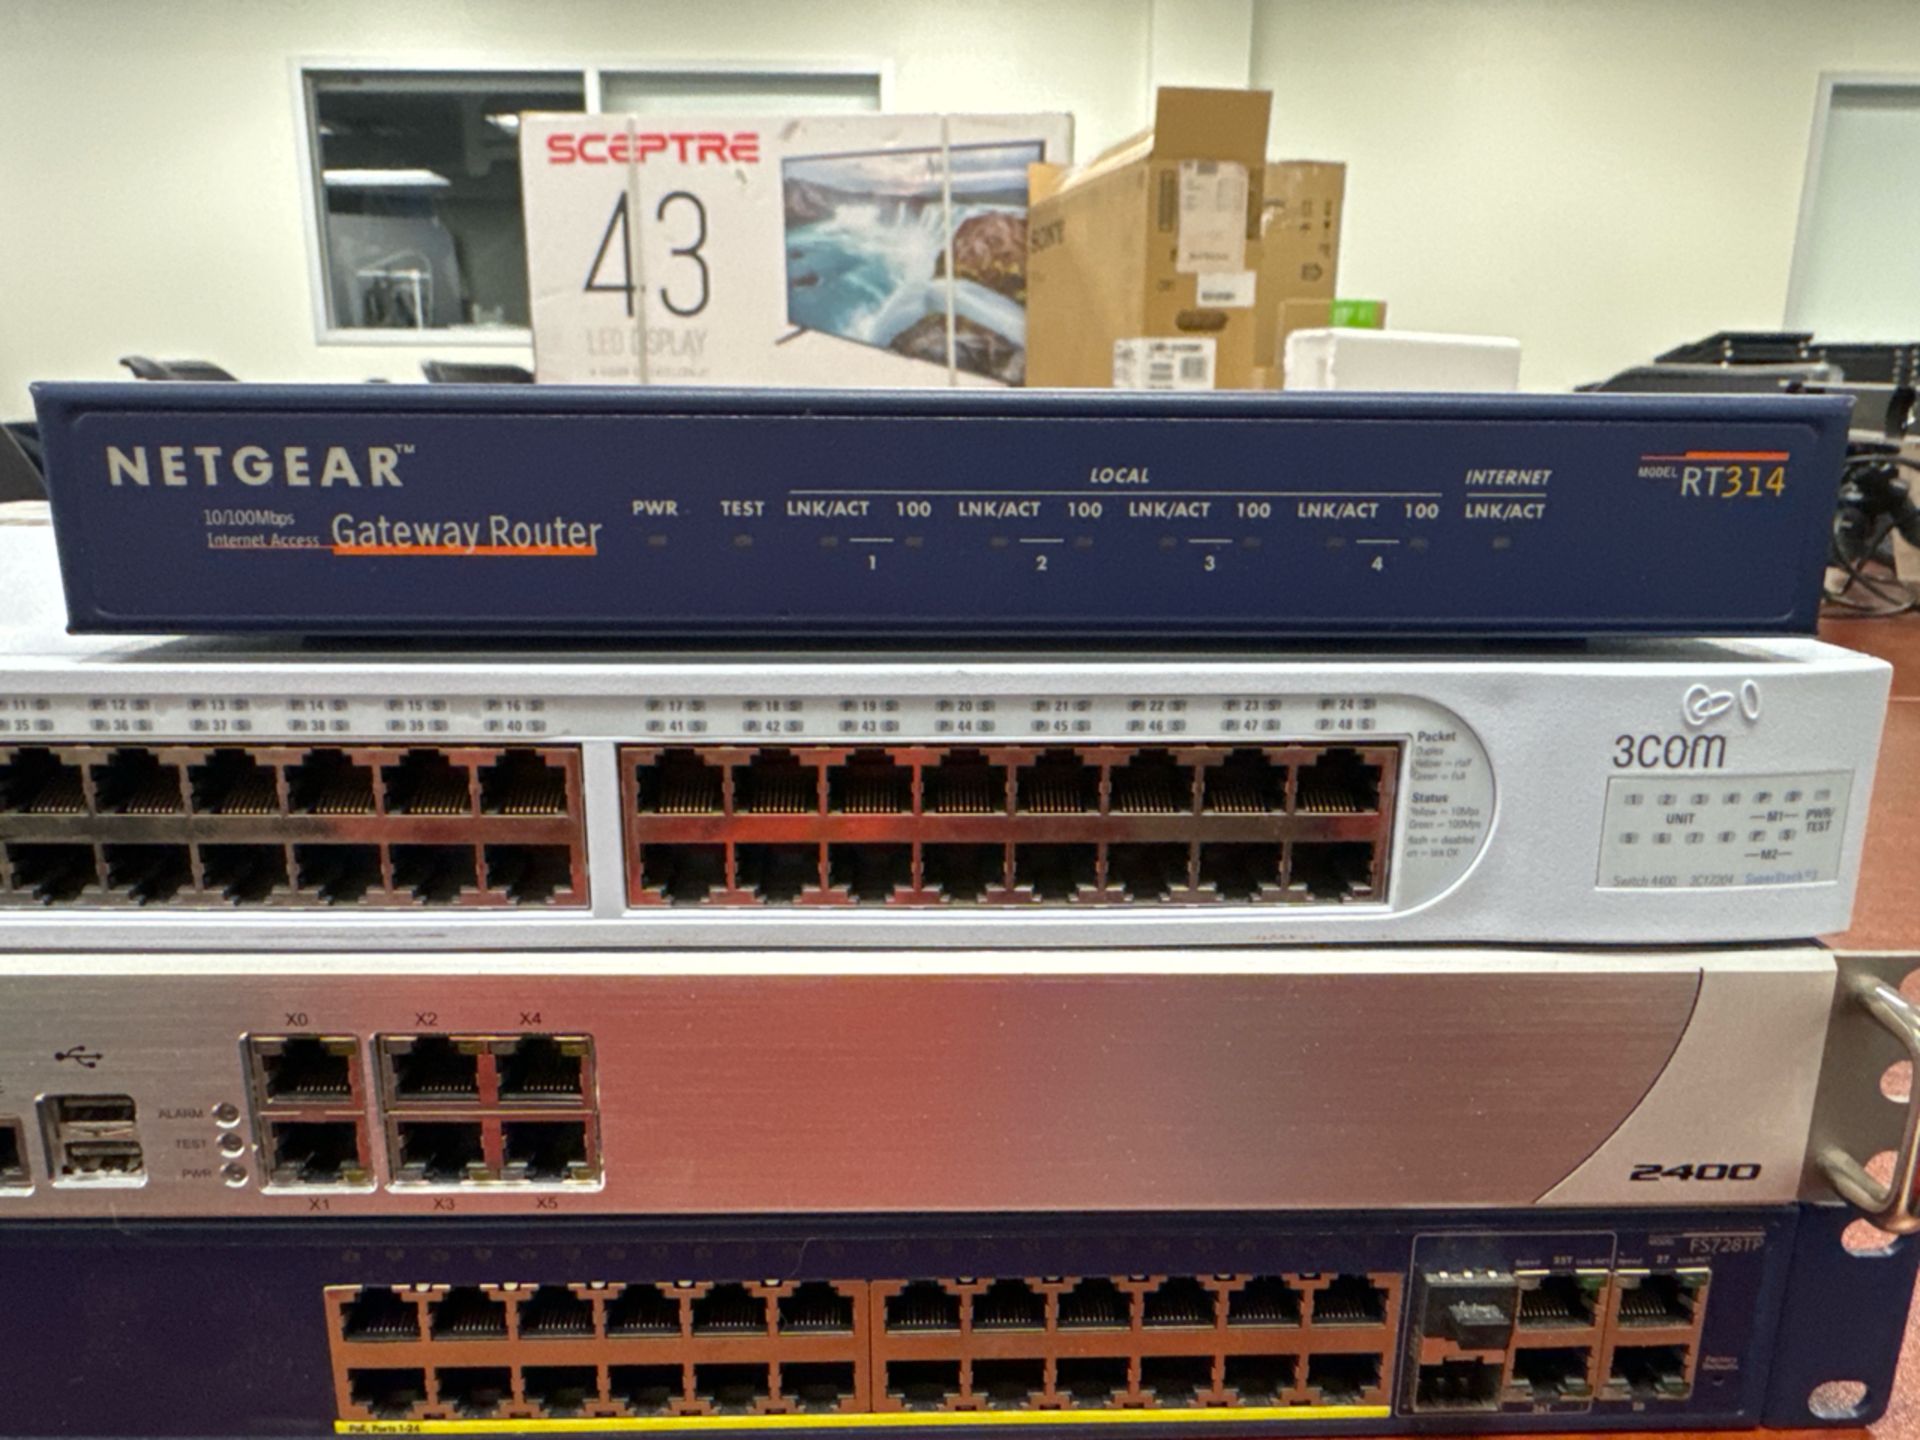 TUV Network Switch, (2) Netgear Network Switches, & Sonicwall Network Switch Boards - Image 2 of 6